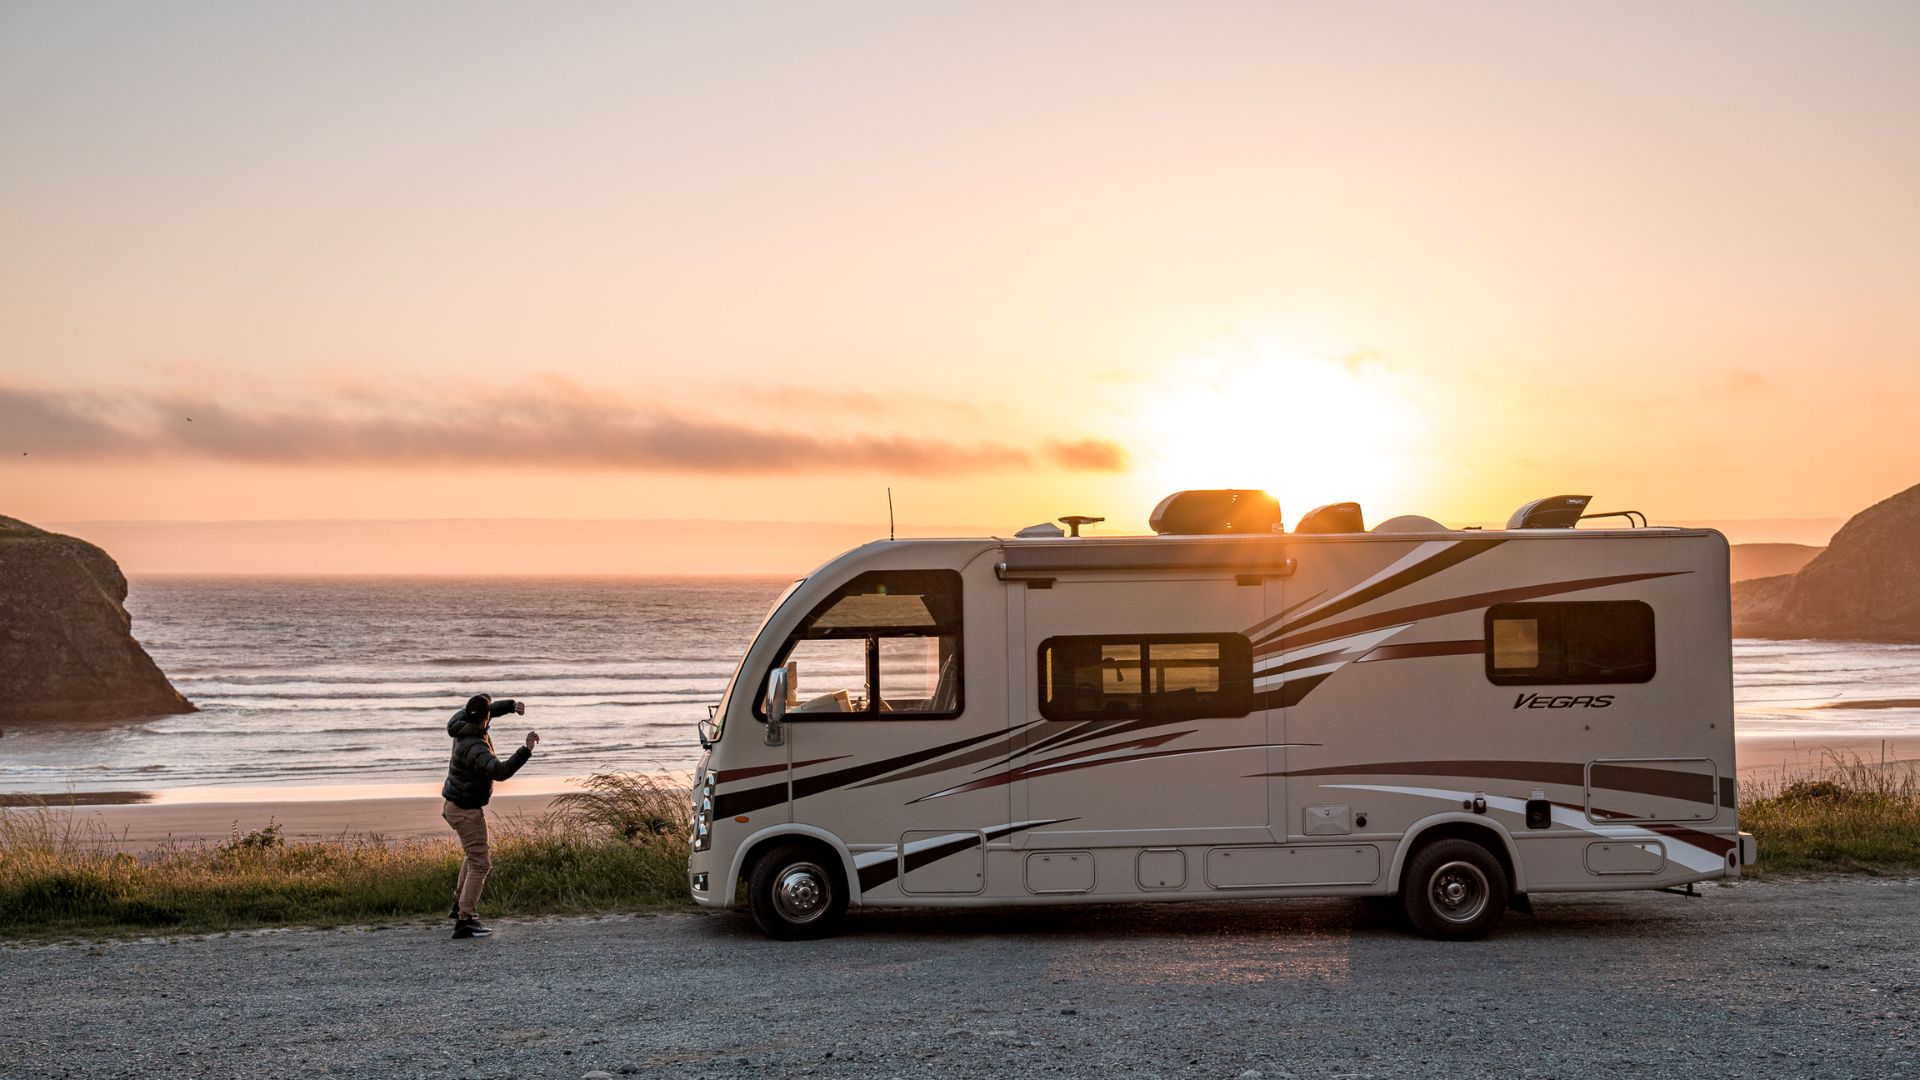 Best Diesel Motorhomes for the Money - View Our Top 5 Picks | RVshare